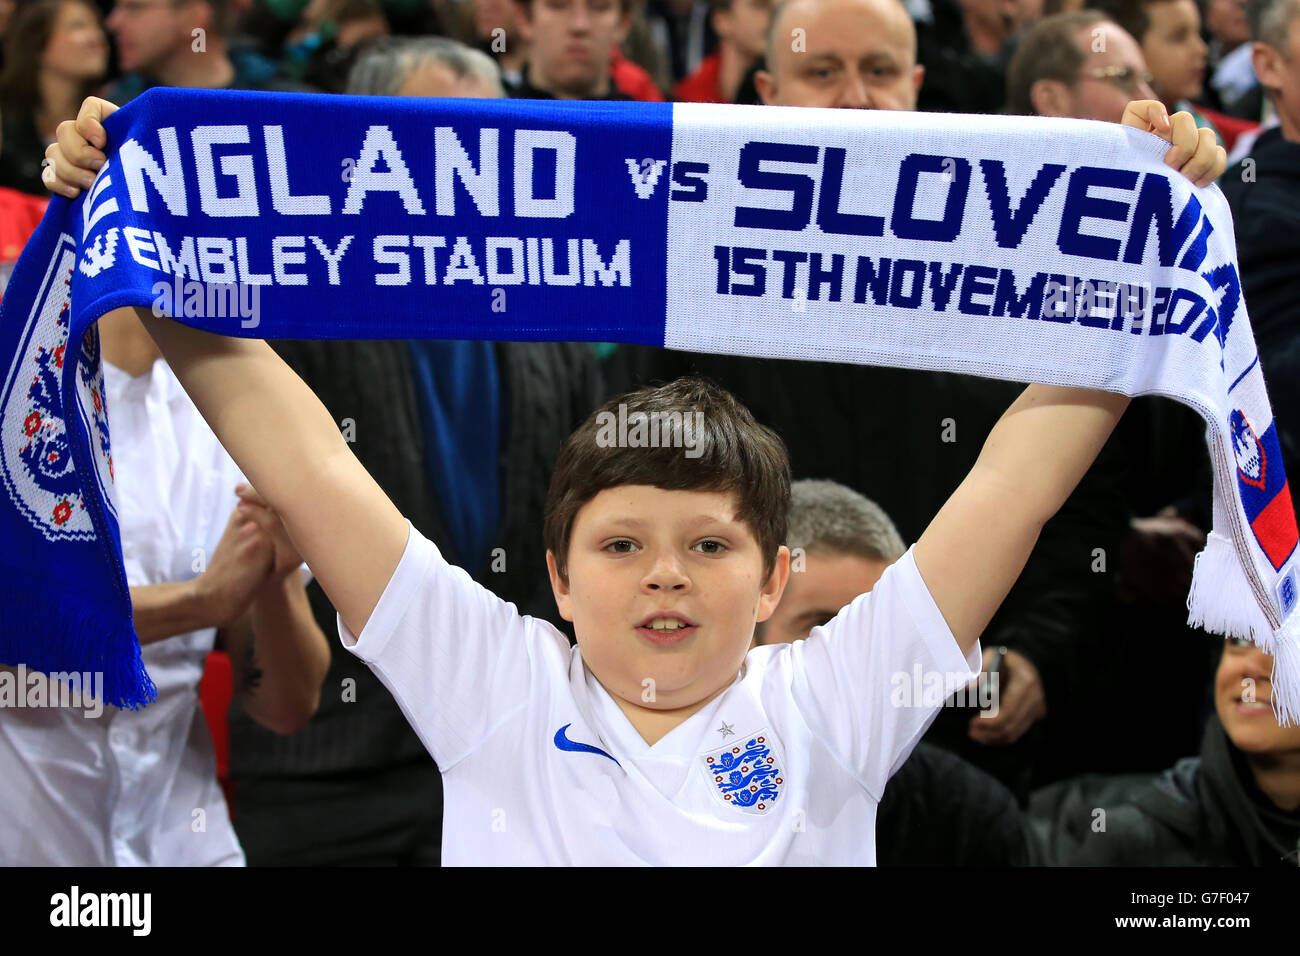 A young England fan shows his support in the stands before the UEFA Euro 2016 Group E Qualifying match at Wembley Stadium, London. PRESS ASSOCIATION Photo. Picture date: Saturday November 15, 2014. See PA story SOCCER England. Photo credit should read: Nick Potts/PA Wire. No editing except cropping. Call +44 (0)1158 447447 or see www.paphotos.com/info/ for full restrictions and further information Stock Photo